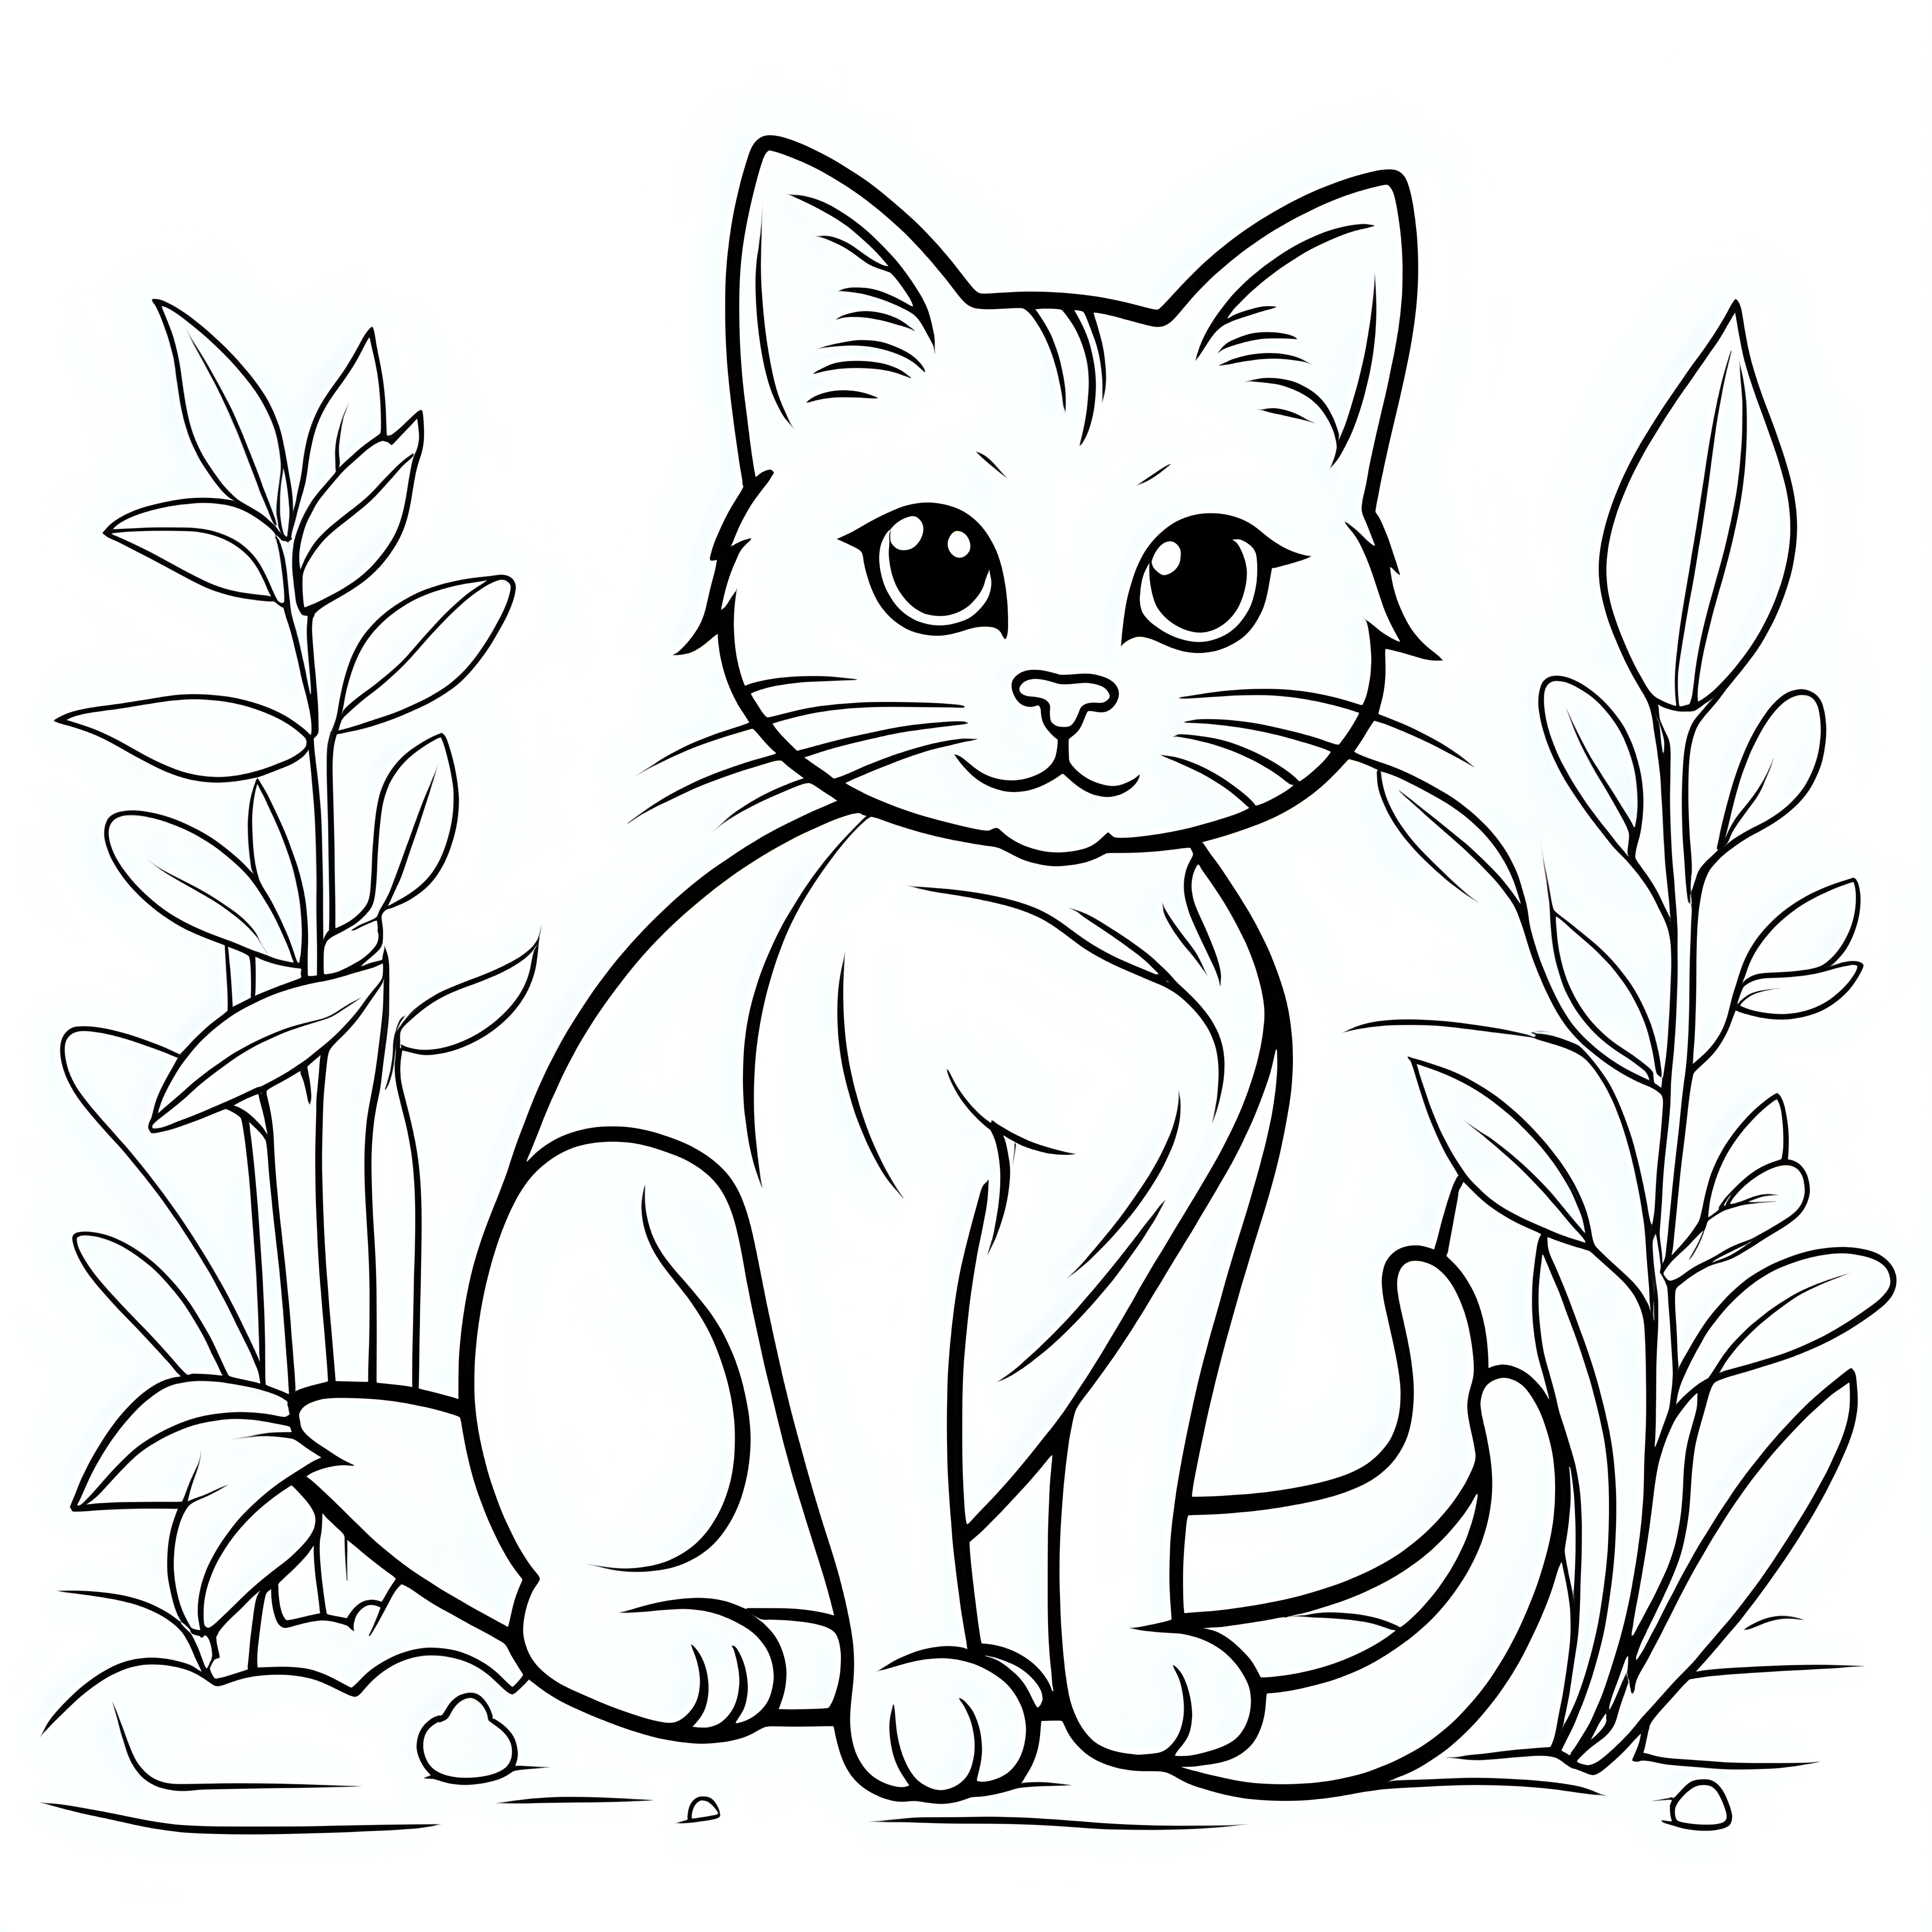 draw a cute cat with only the outline in black for a coloring book for kids